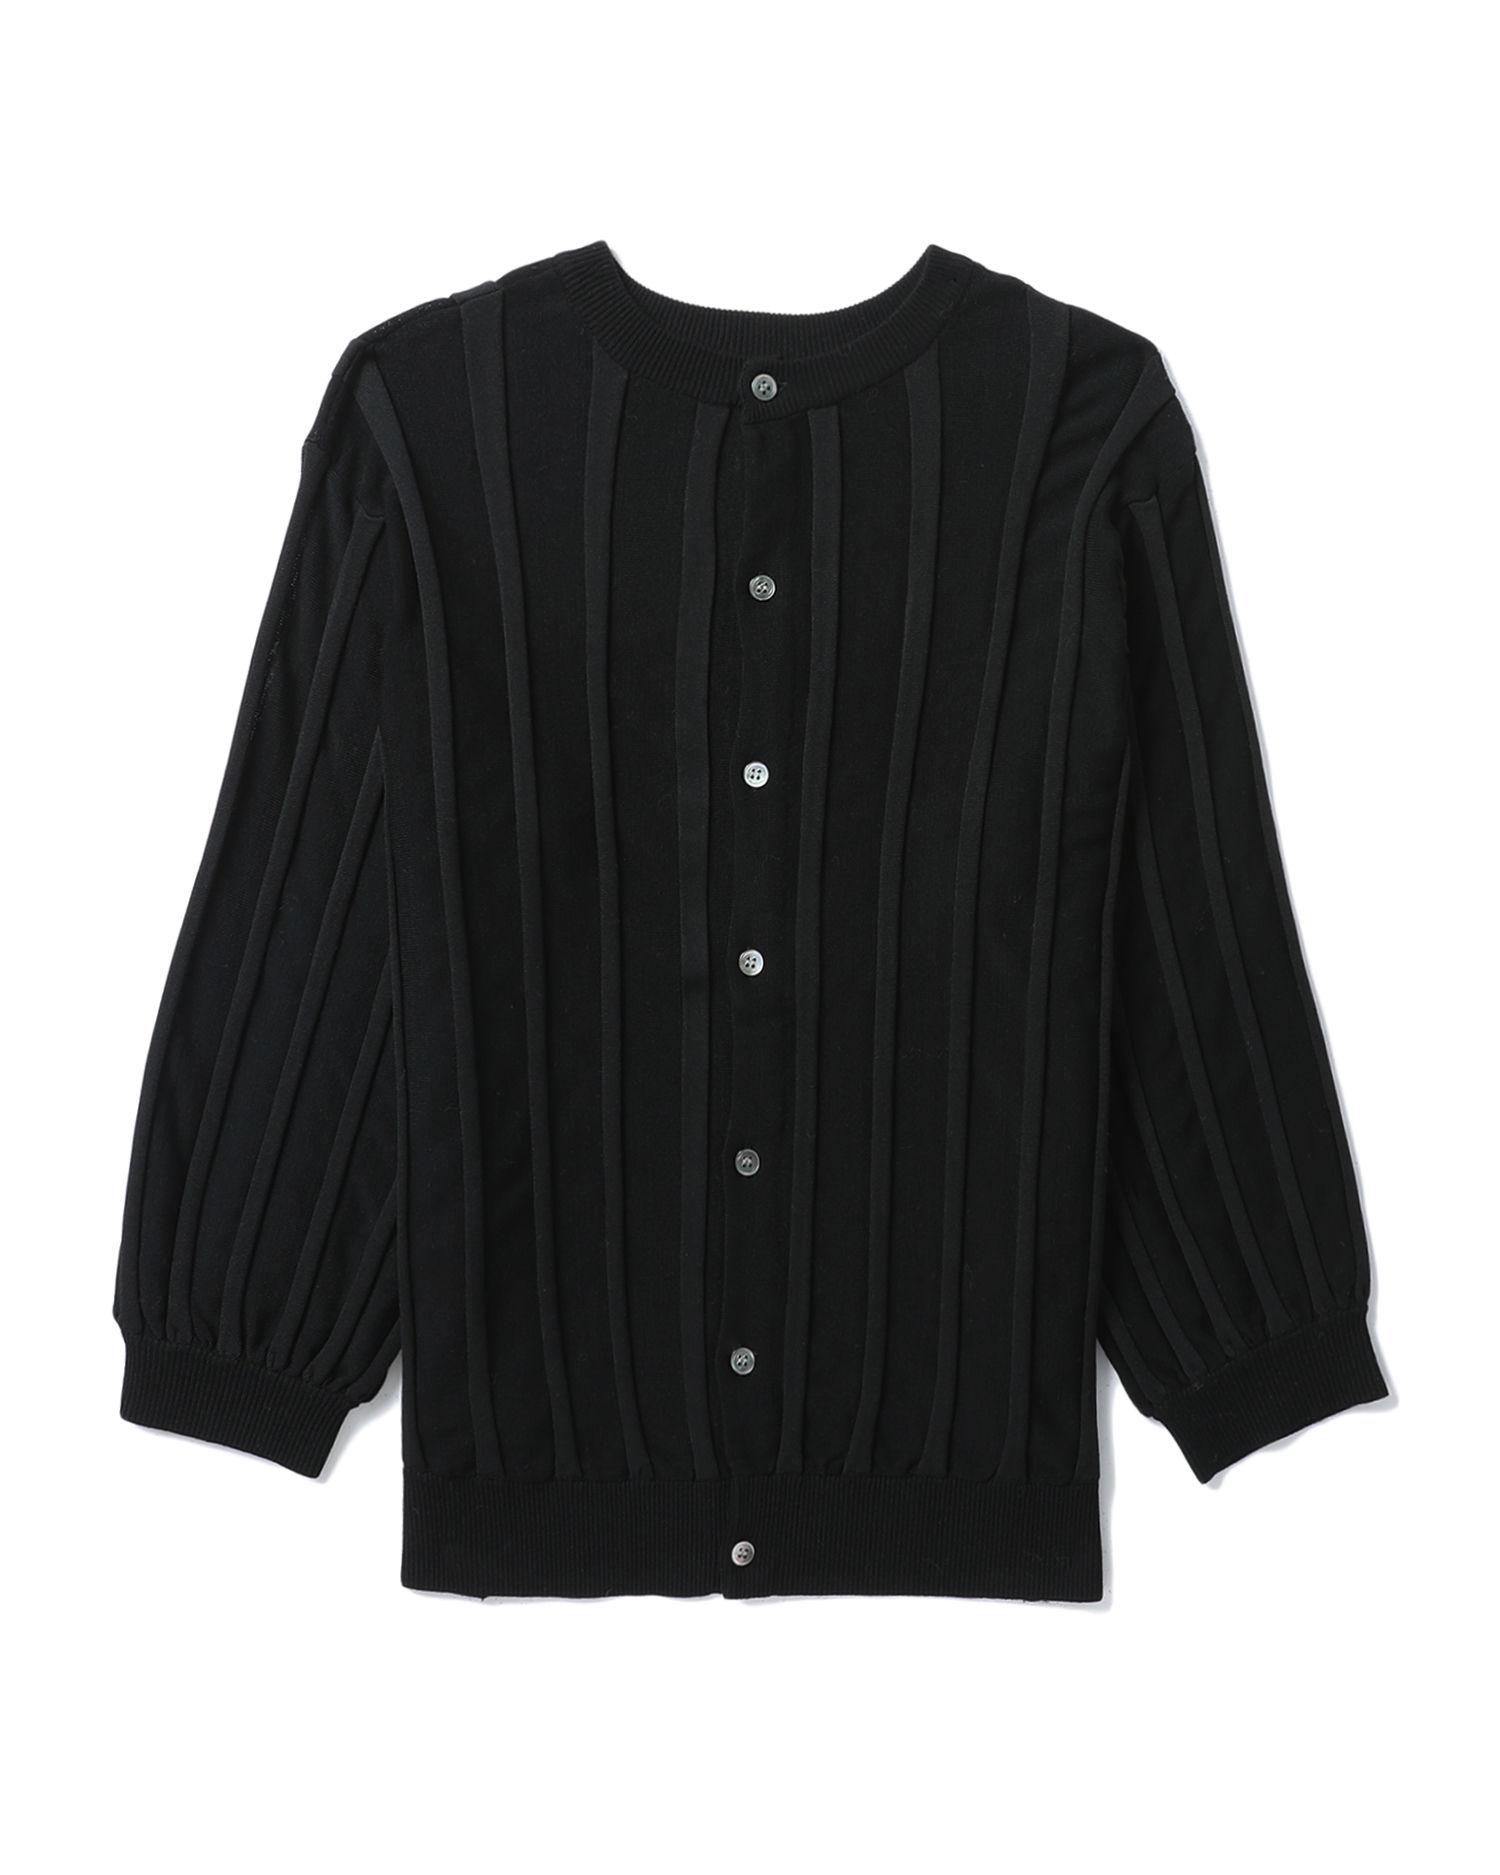 Pleated cardigan by ZUCCA